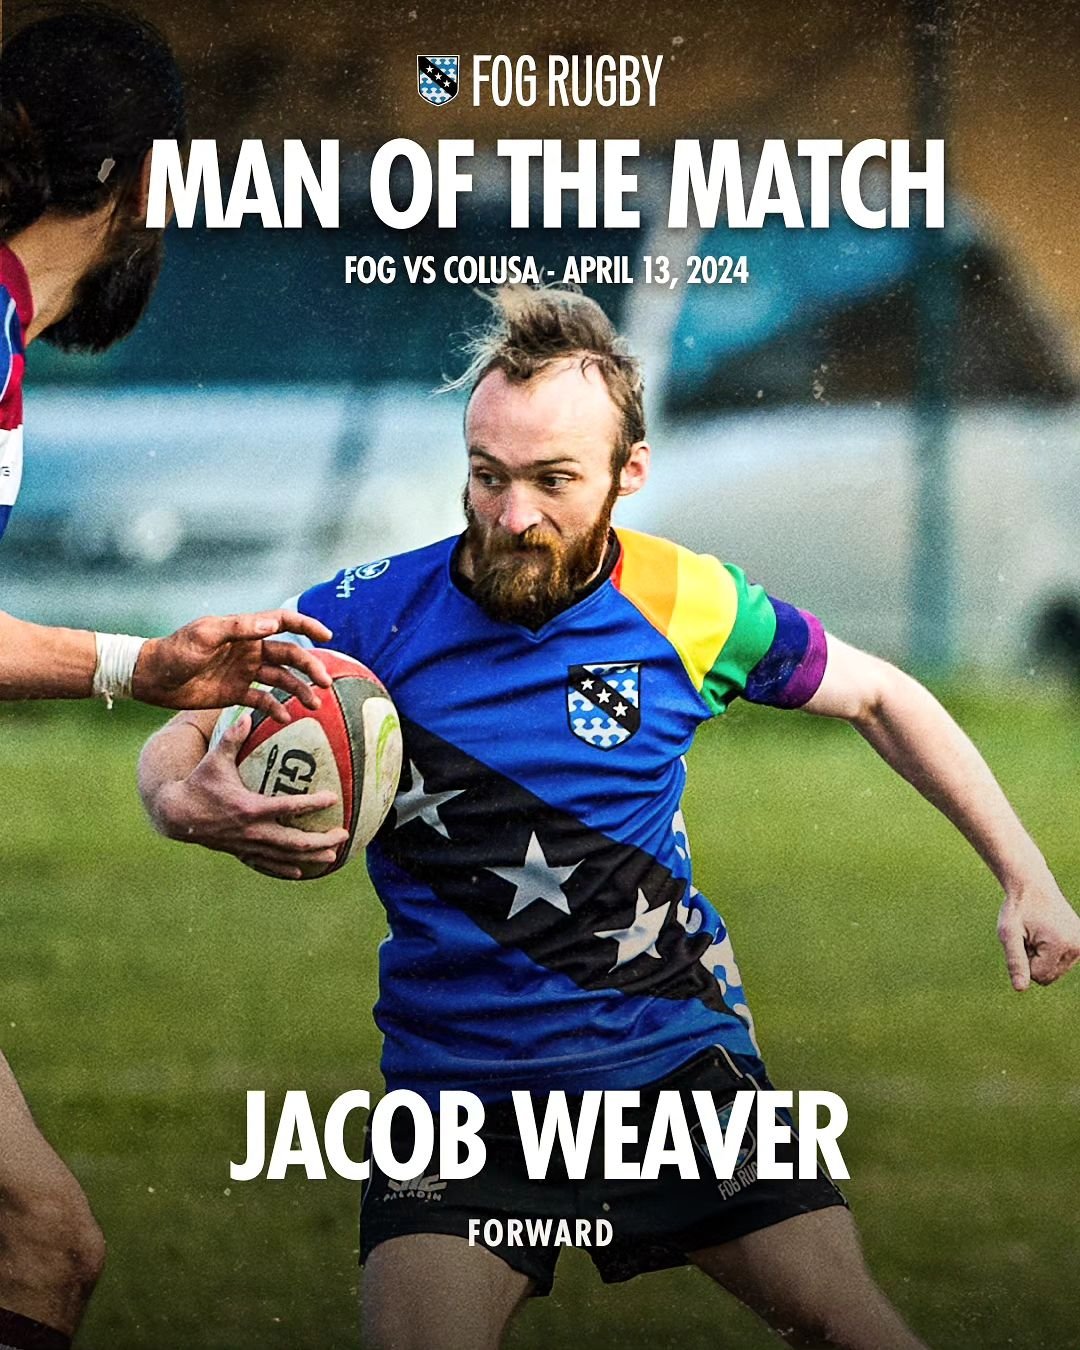 Congrats to Jacob Weaver, our scrum half this past weekend, for winning Man of the Match! You go hot possum. #rollfogroll #fogrugby @theb4dger